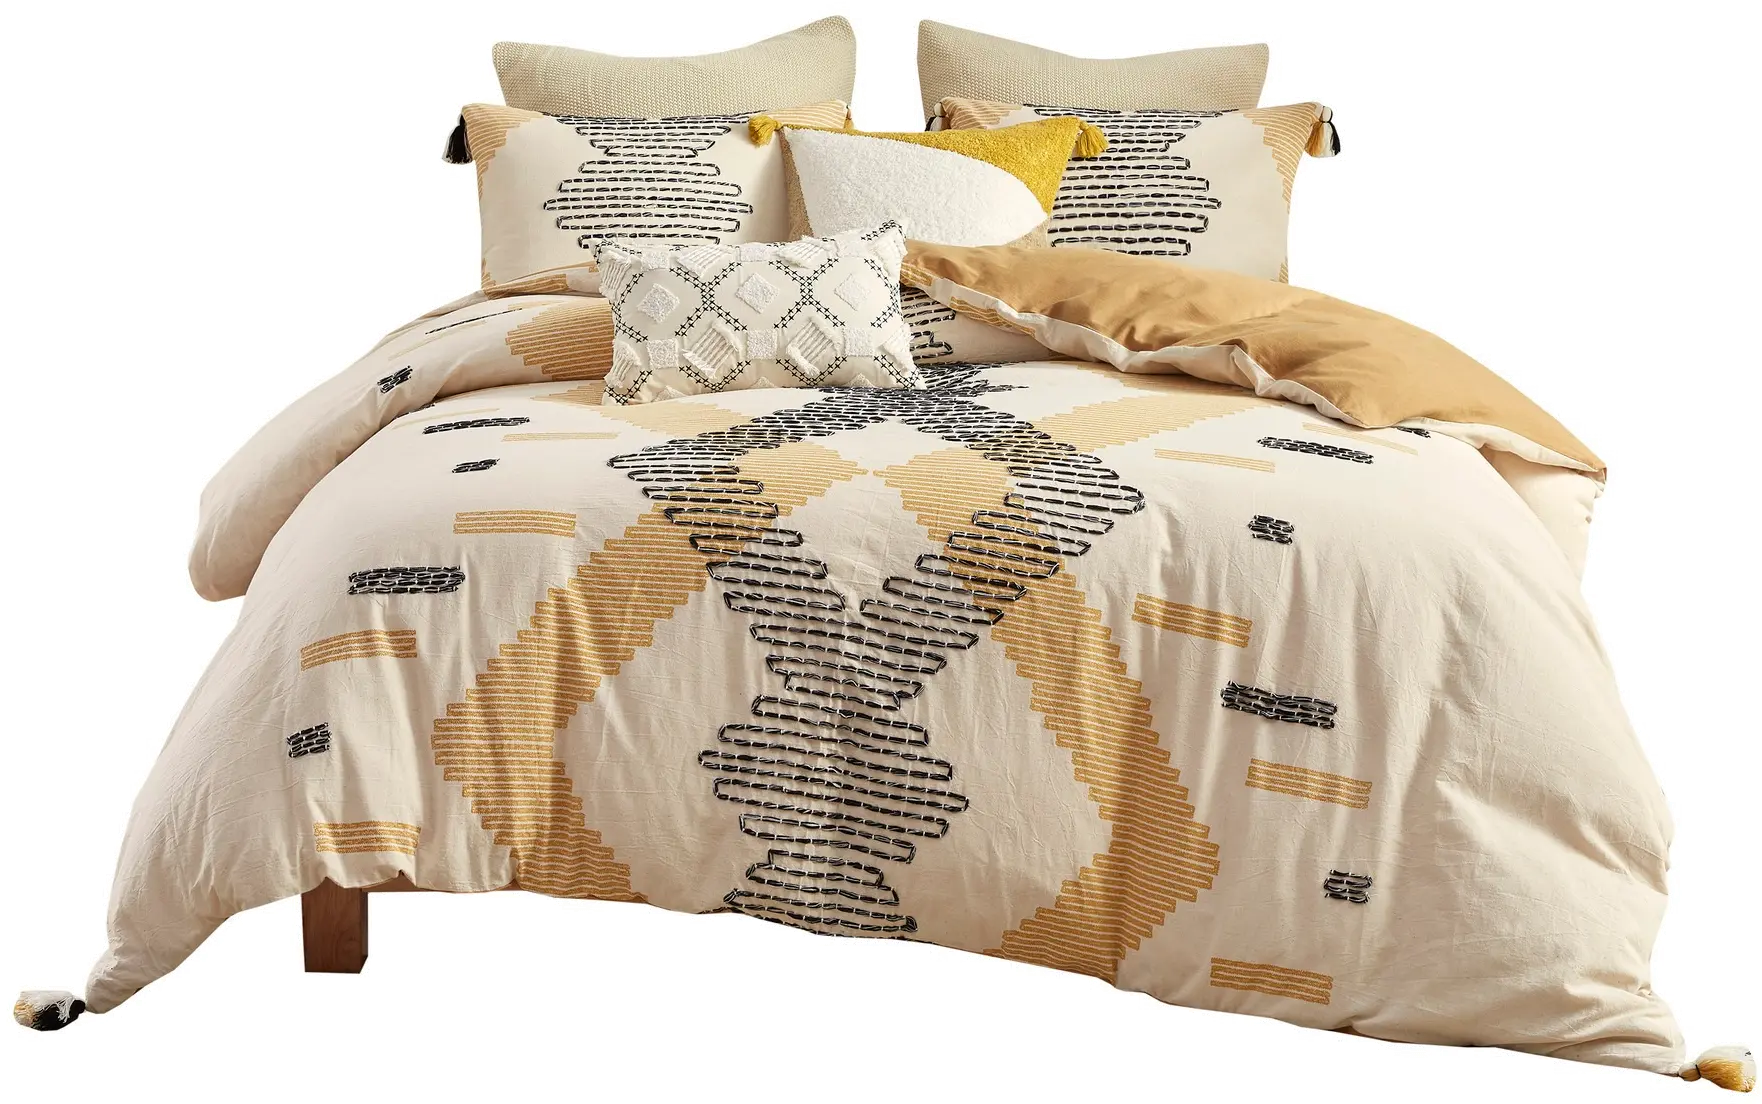 Yellow and Gray Geometric Queen Arizona 3 Piece Bedding Collection